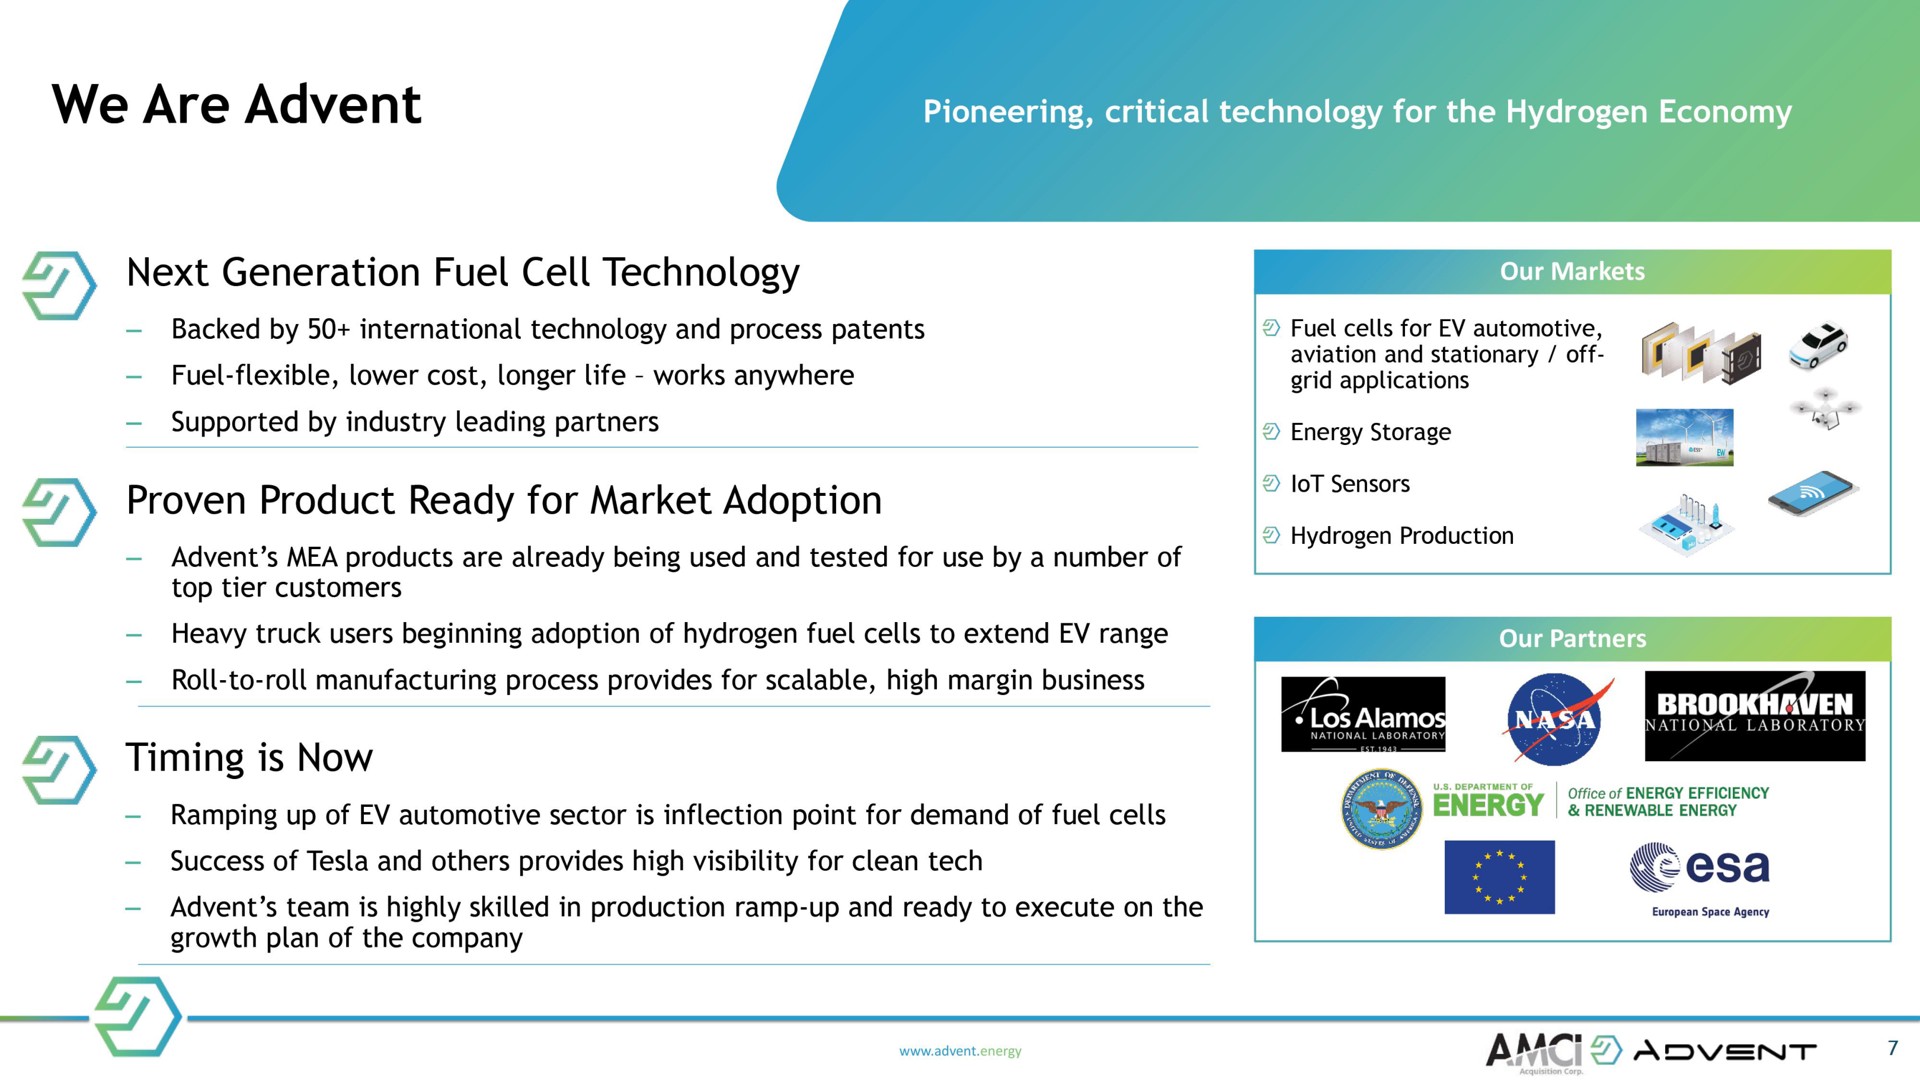 we are pioneering critical technology for the hydrogen economy next generation fuel cell technology proven product ready for market adoption timing is now | Advent